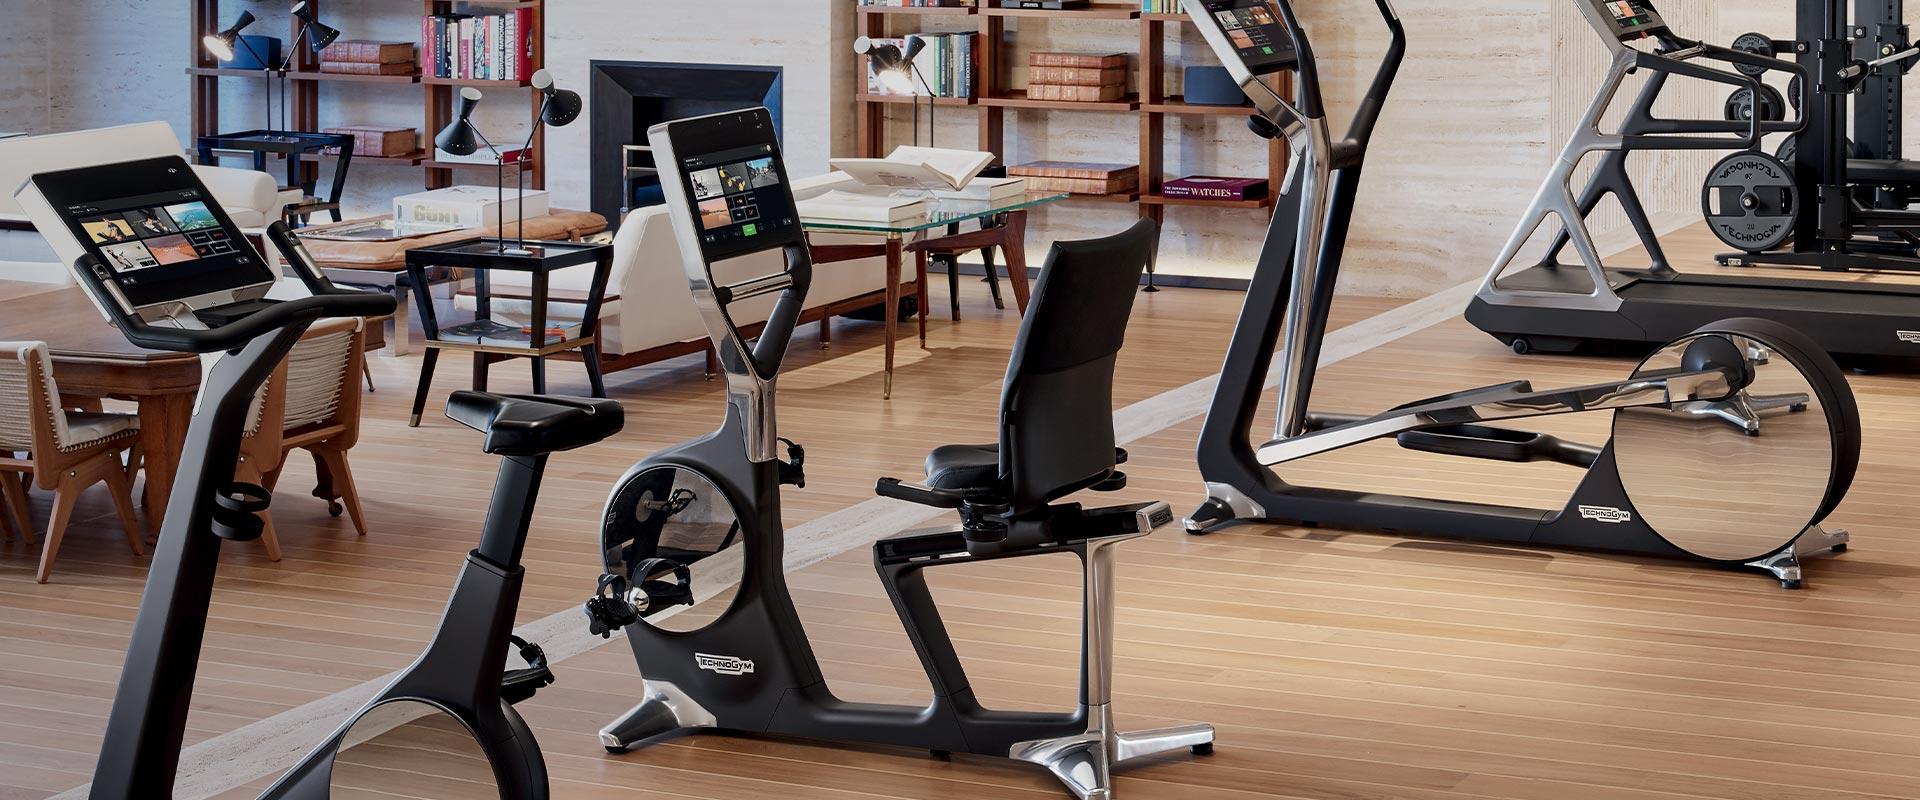 Technogym continues to grow